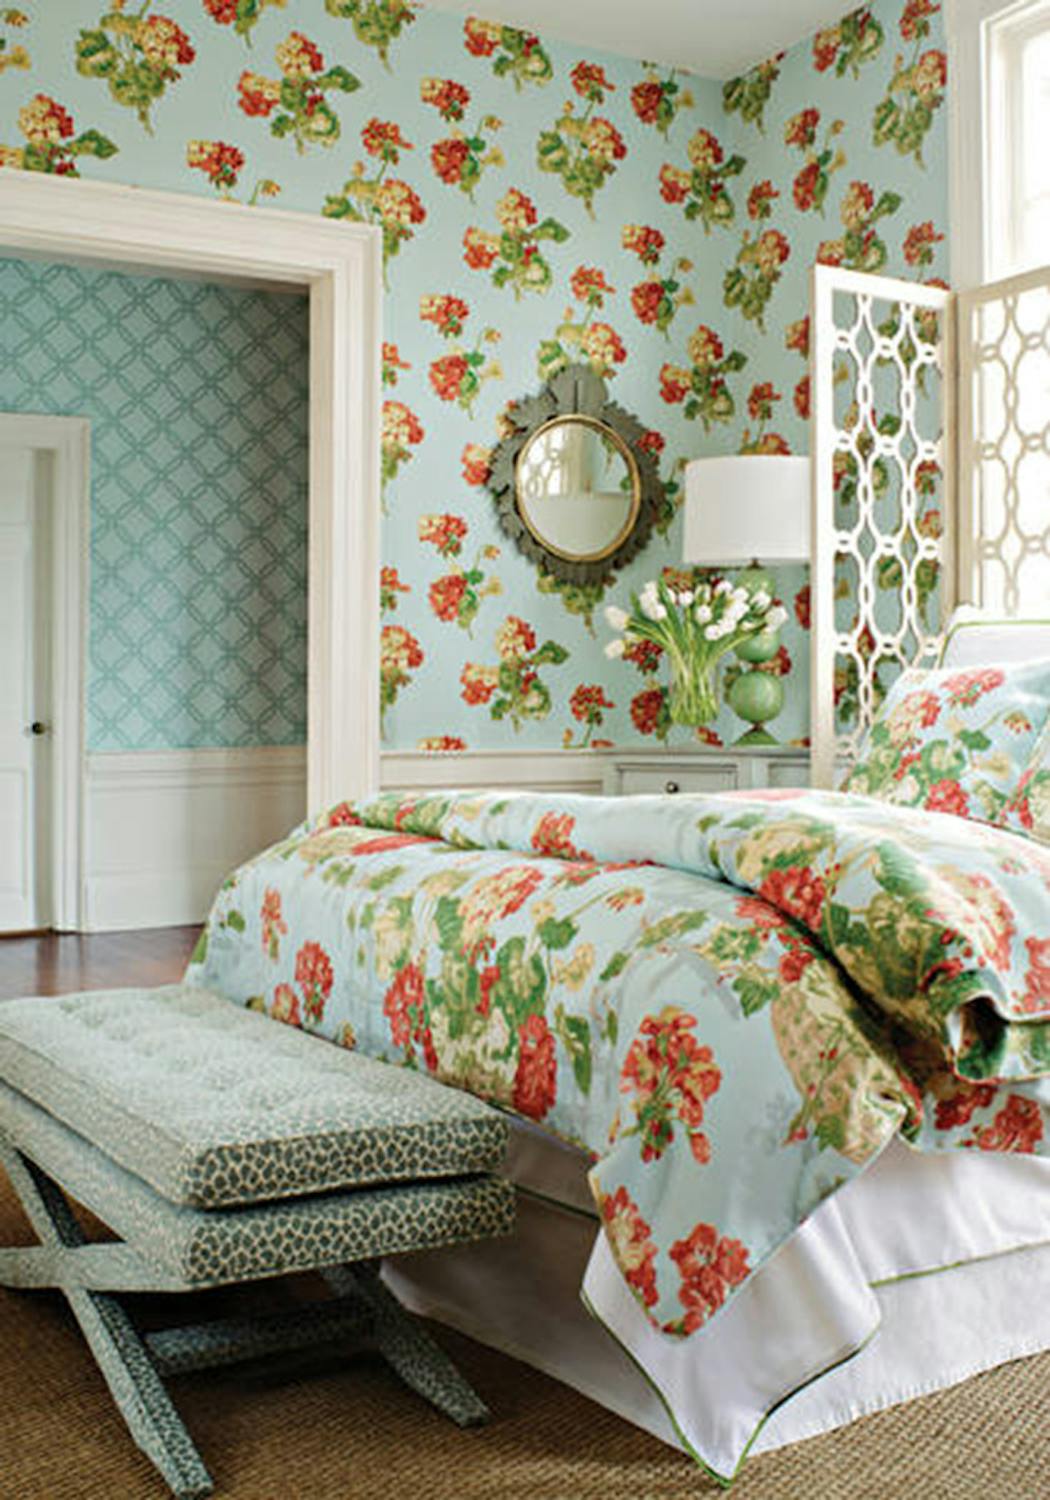 Grandmillennial style is all about celebrating pattern, texture and color from floor to ceiling.